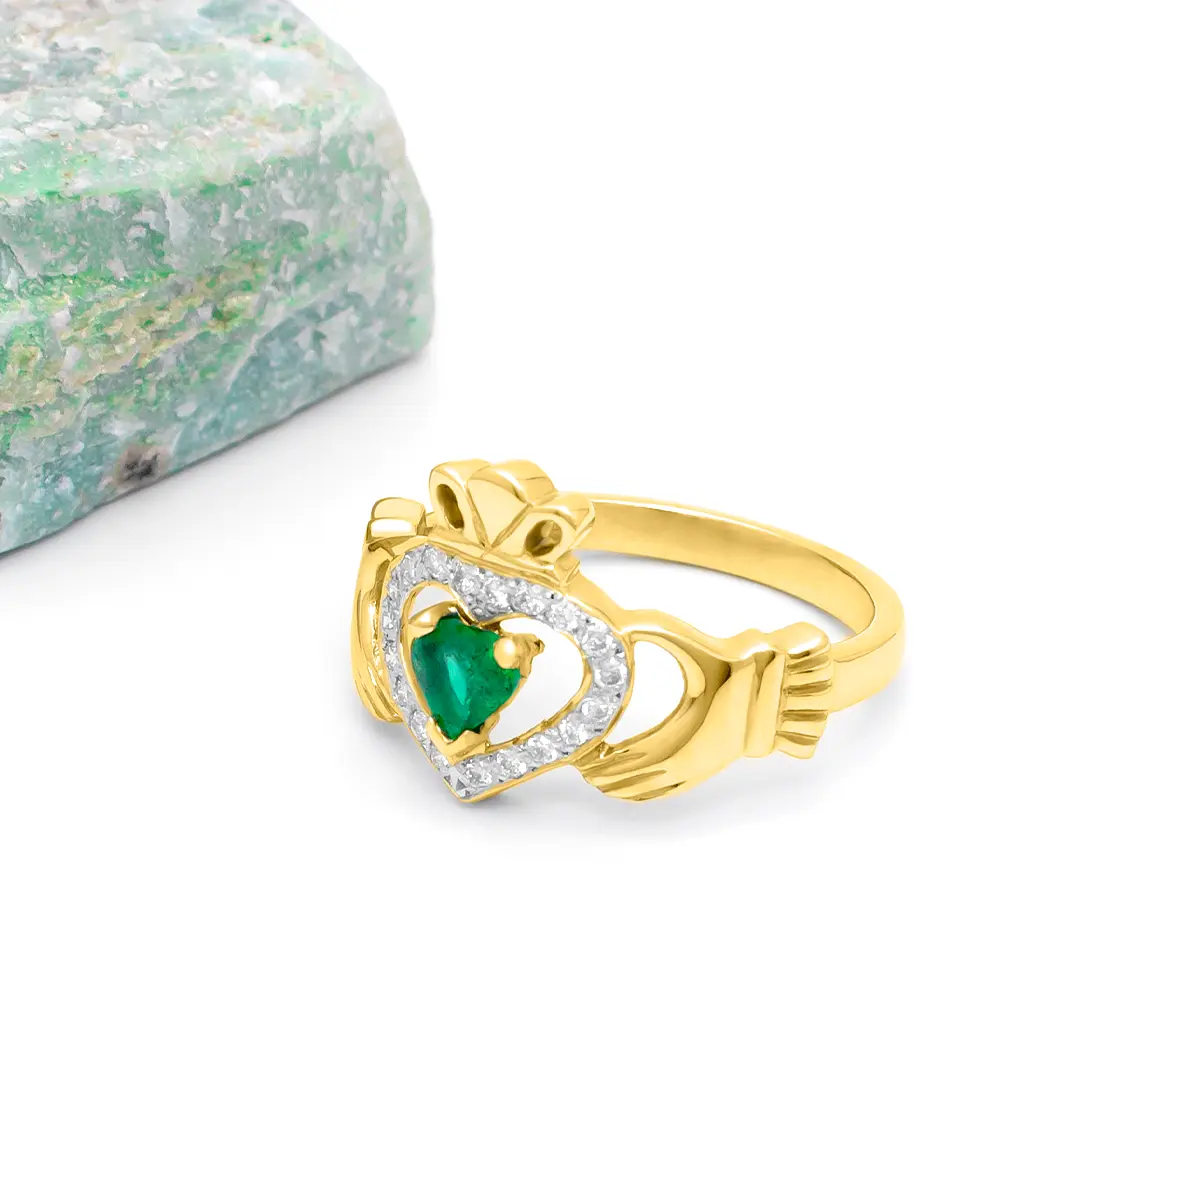 Emerald Claddagh Ring Adorned With Diamonds...